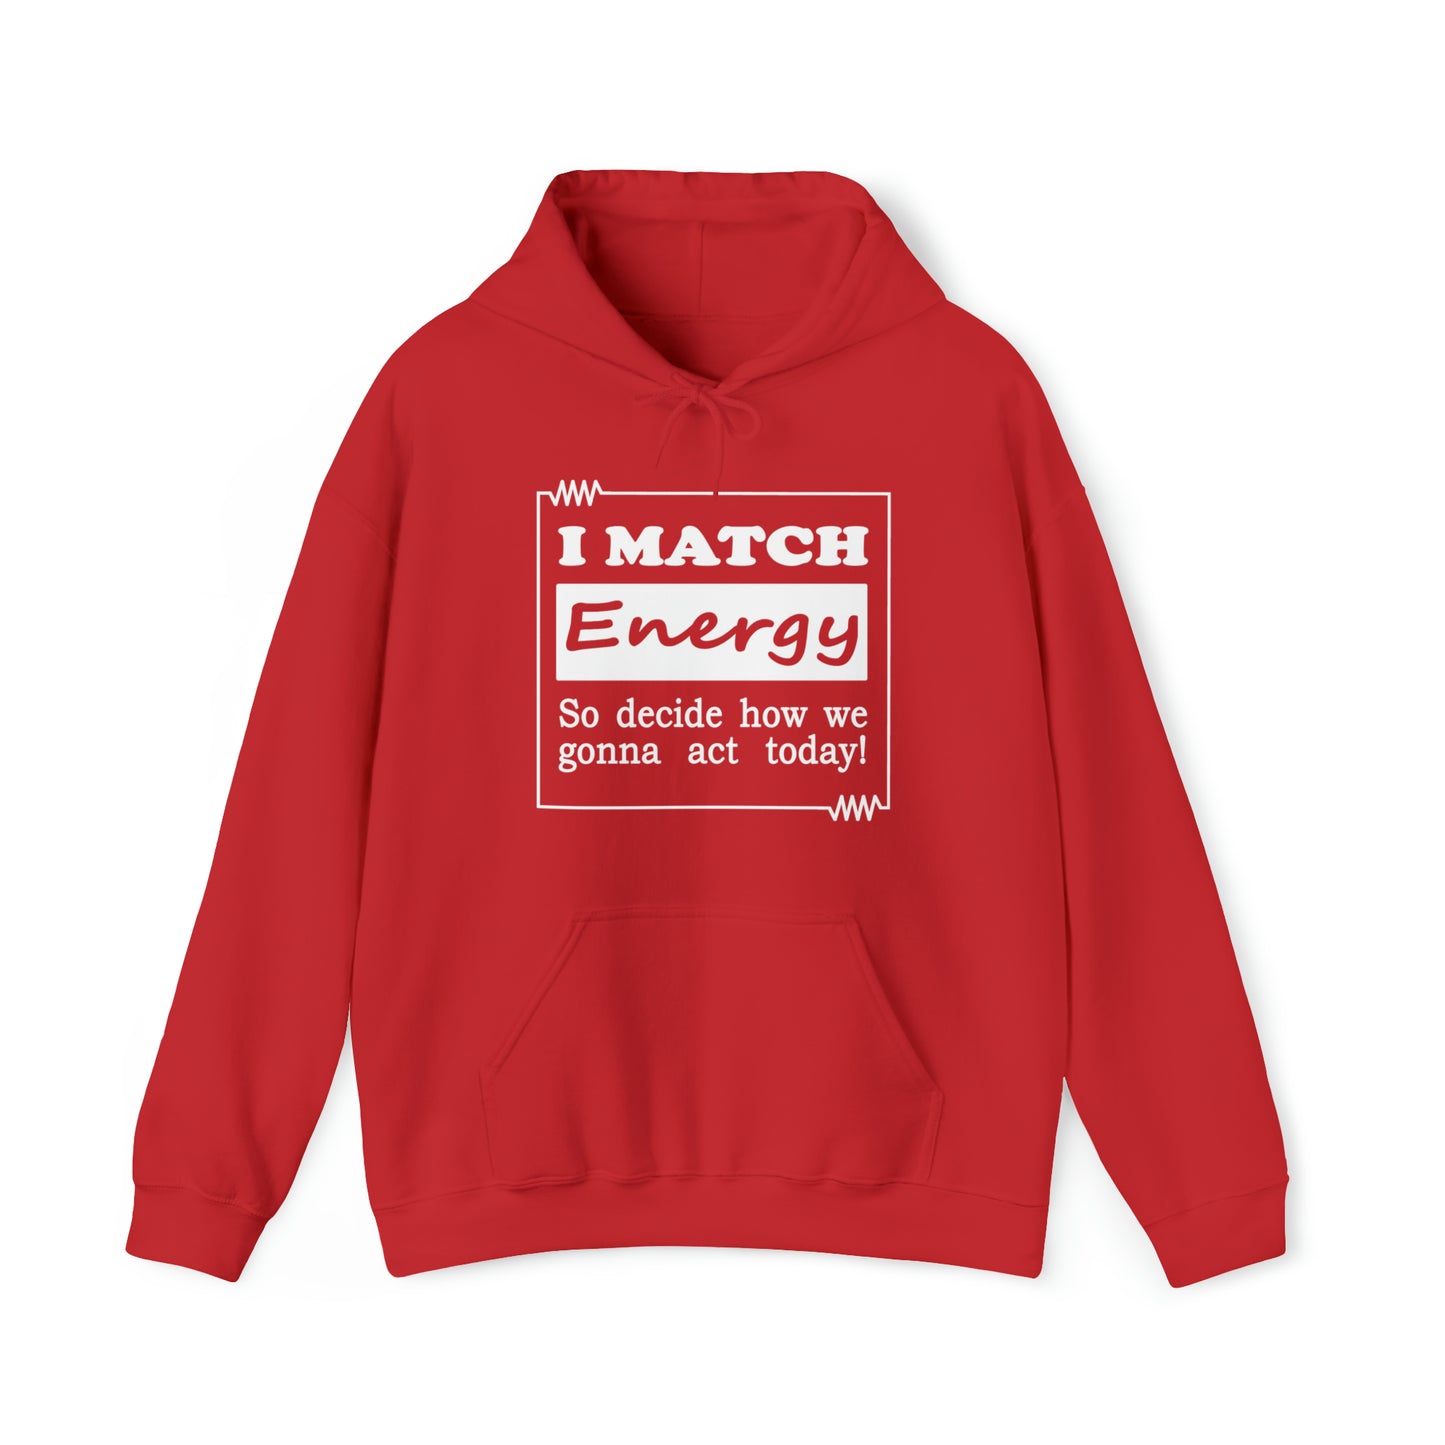 I Match Energy Hoodie - White Text